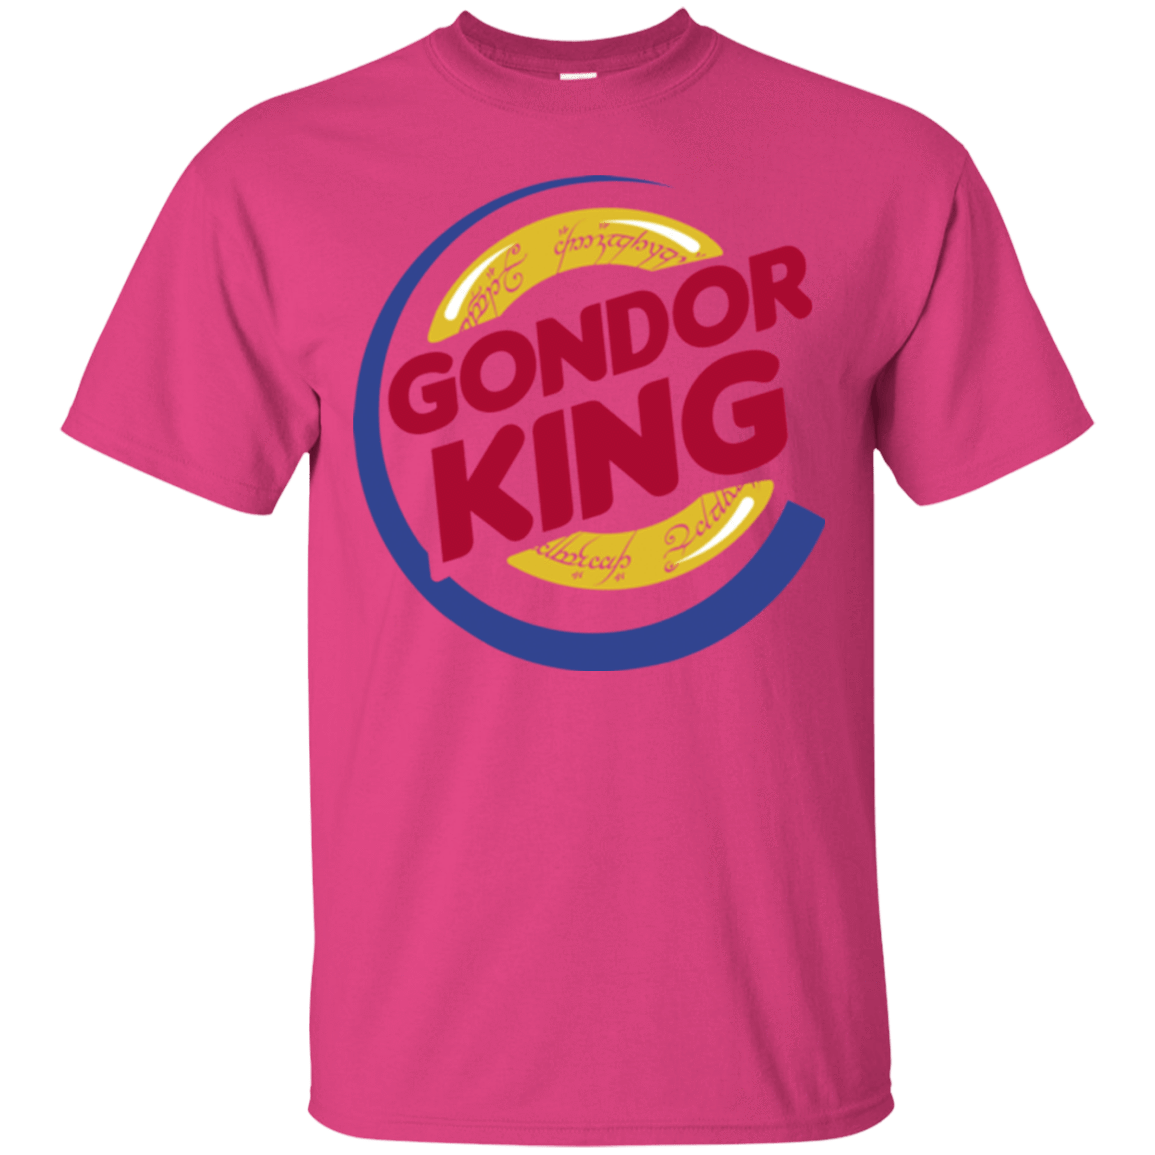 T-Shirts Heliconia / Small Gondor King T-Shirt